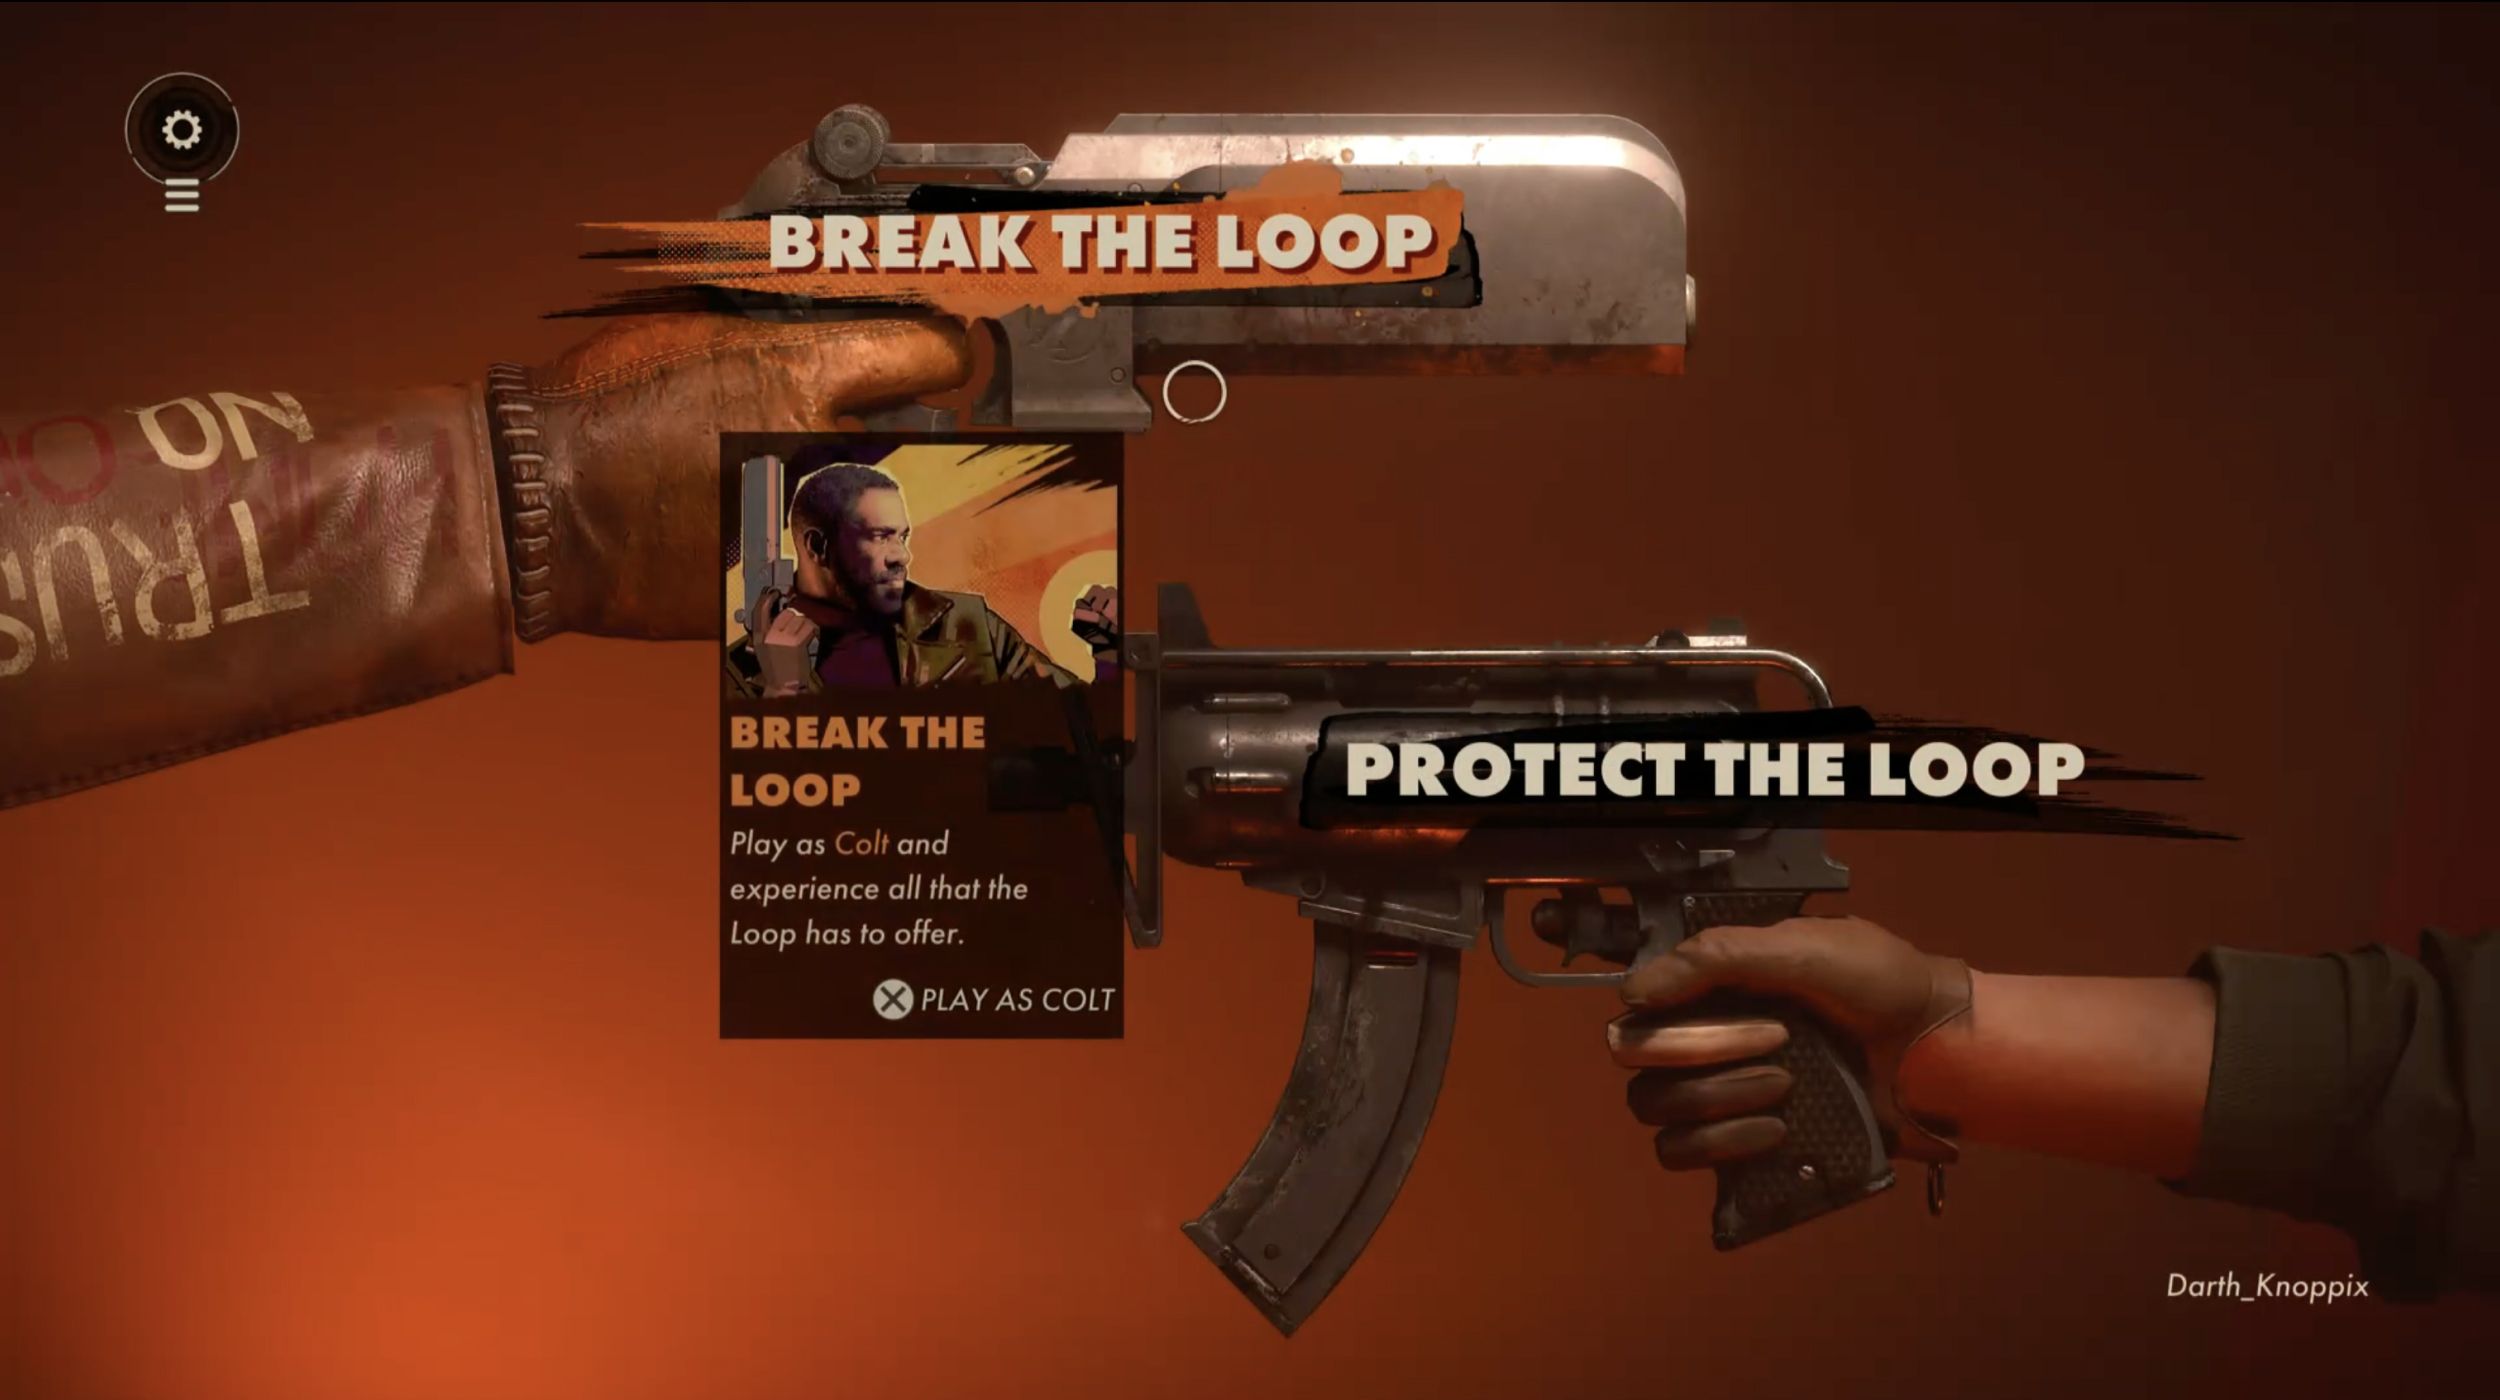 The title screen of Deathloop on PS5 showing "BREAK THE LOOP" and "PROTECT THE LOOP" titles overlayed on two characters hands holding guns